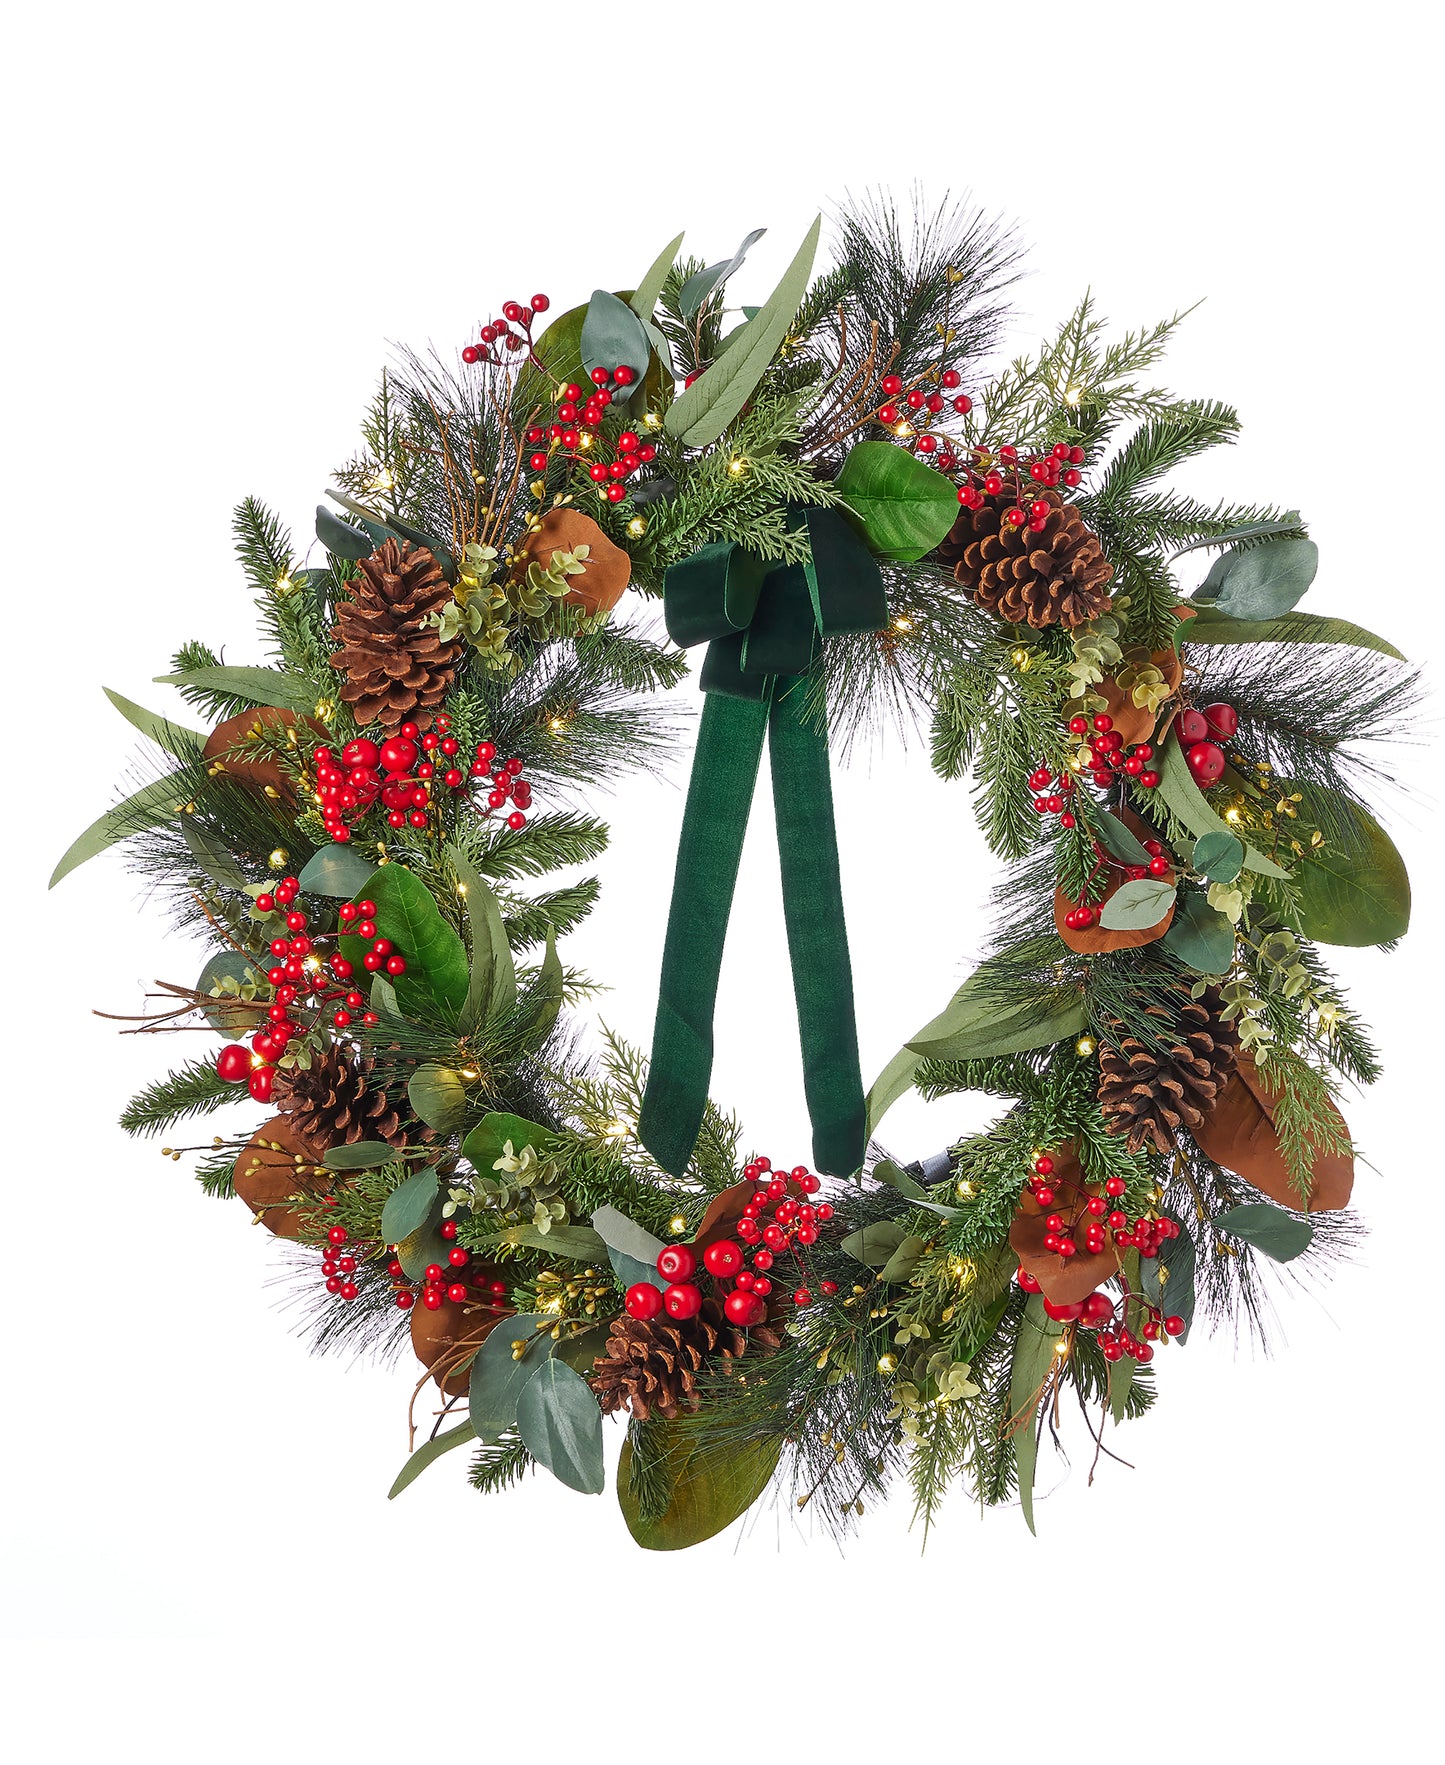 Magnolia Leaf, Eucalyptus, and Berry 28in Wreath, Pre-Lit with 35 LED Fairy Lights (Battery-Operated)